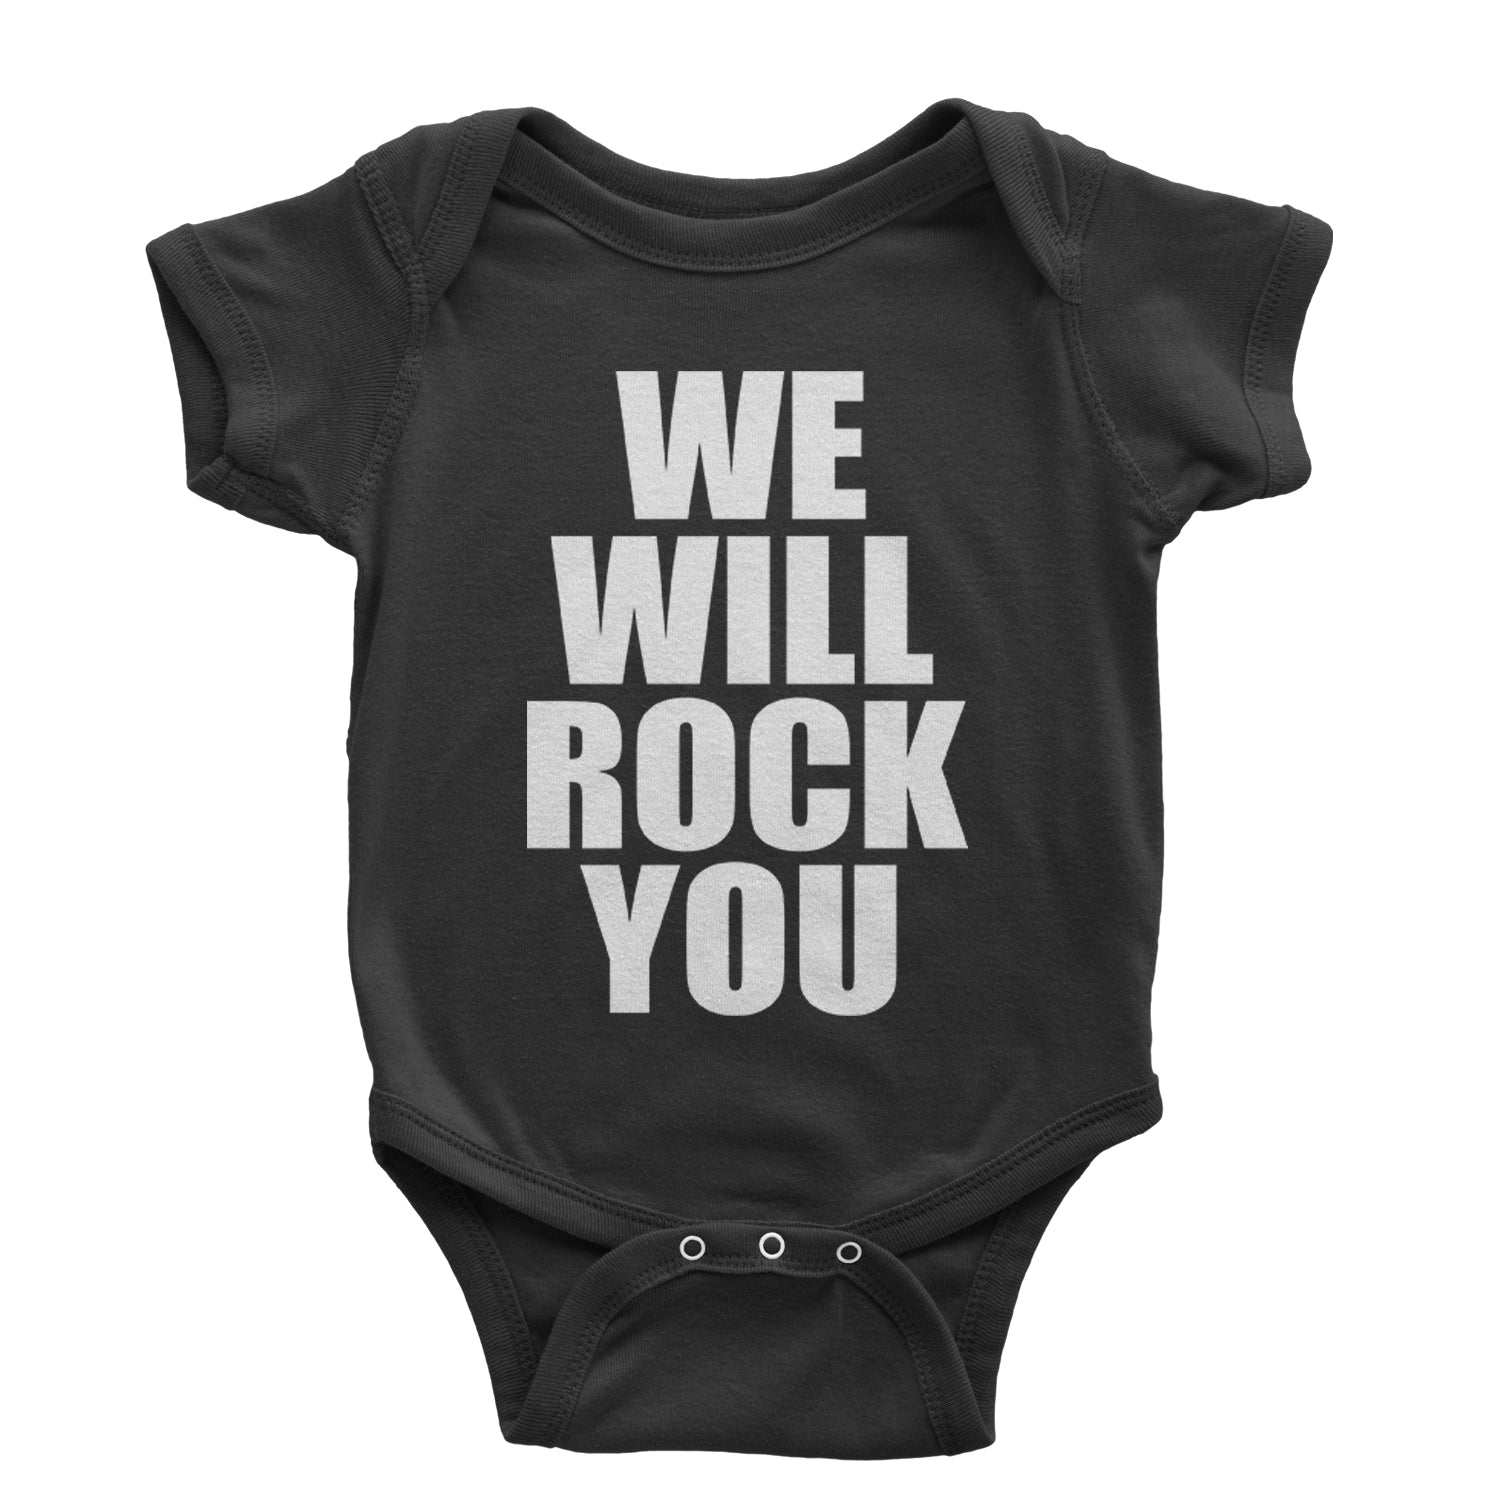 We Will Rock You Infant One-Piece Romper Bodysuit and Toddler T-shirt #expressiontees by Expression Tees